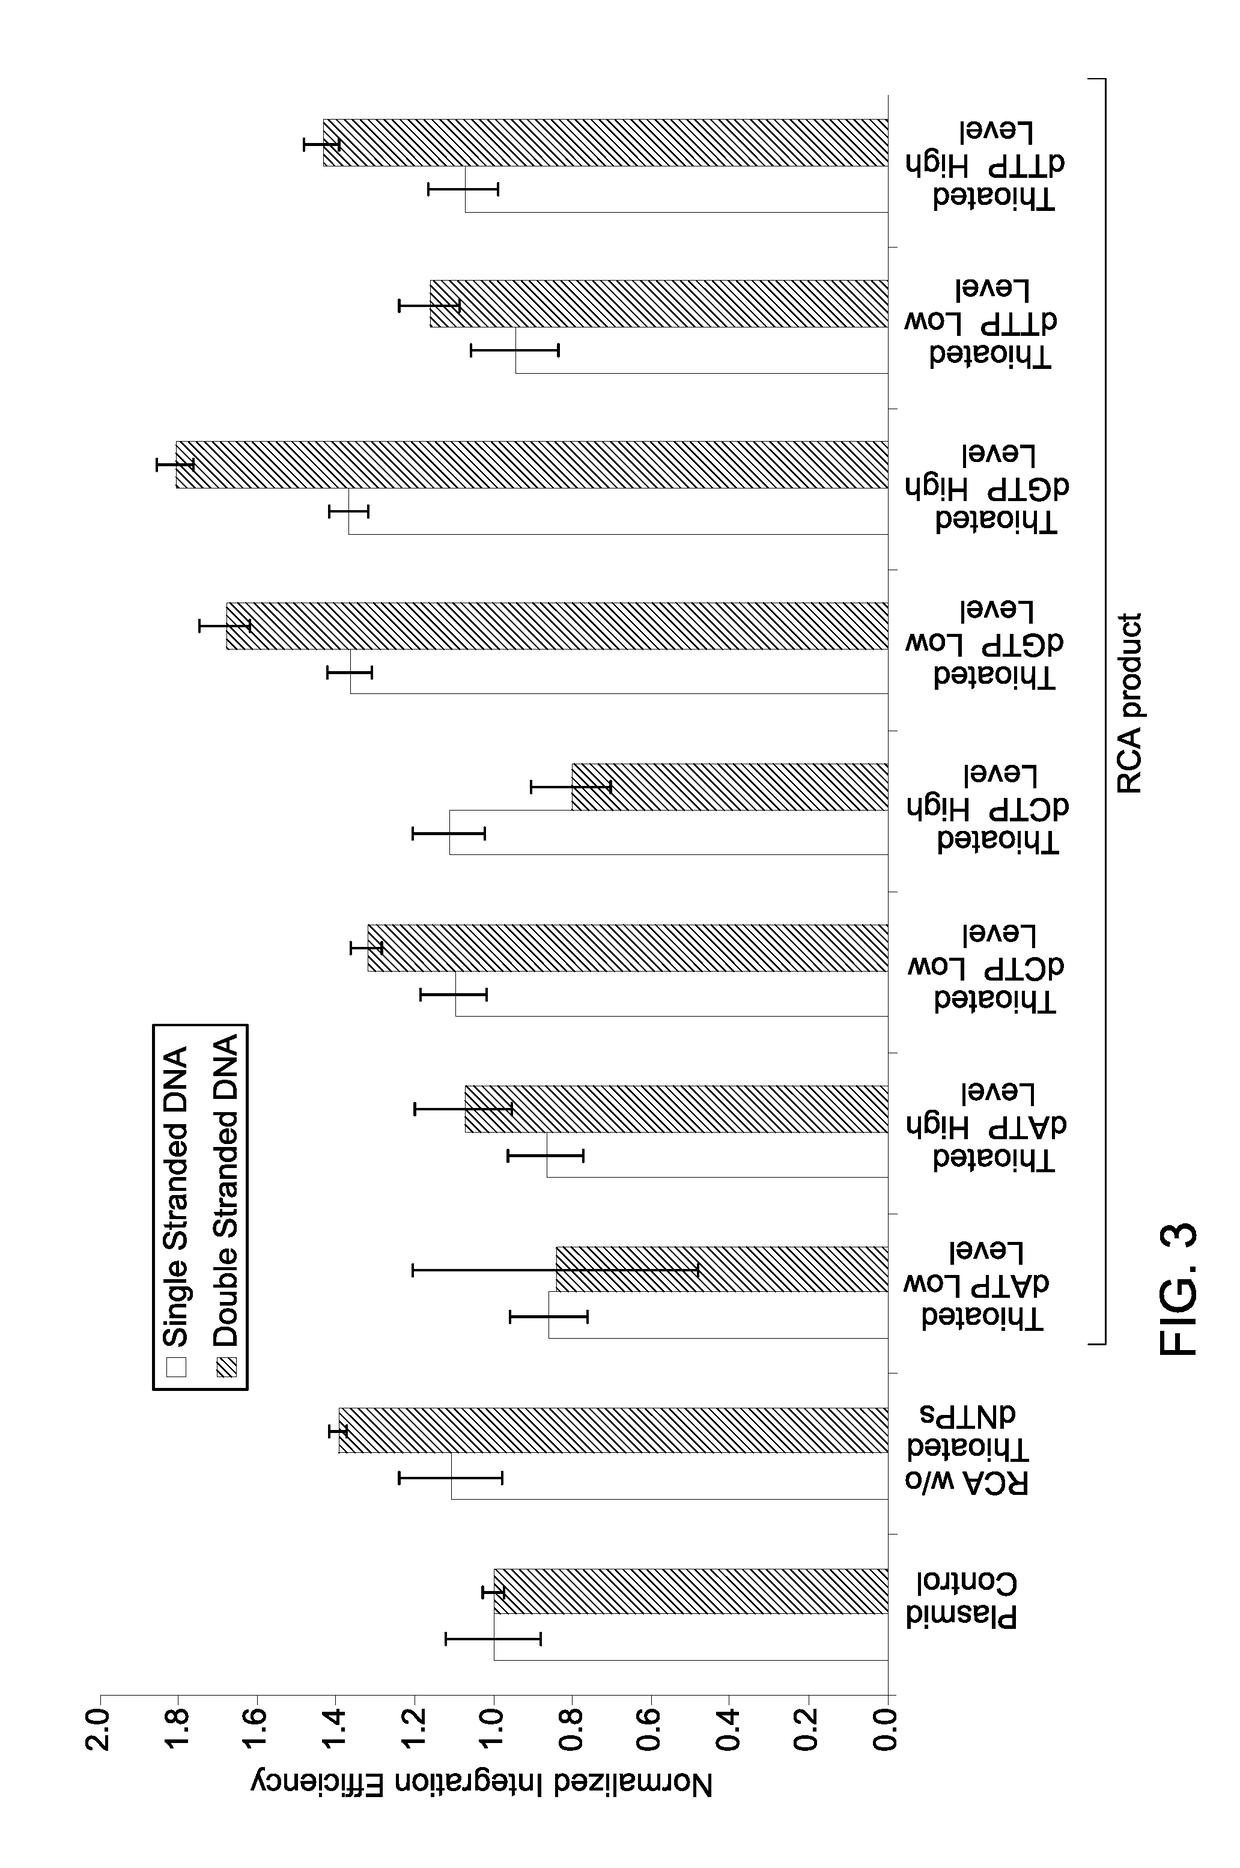 Site-specific DNA modification using a donor DNA repair template having tandem repeat sequences